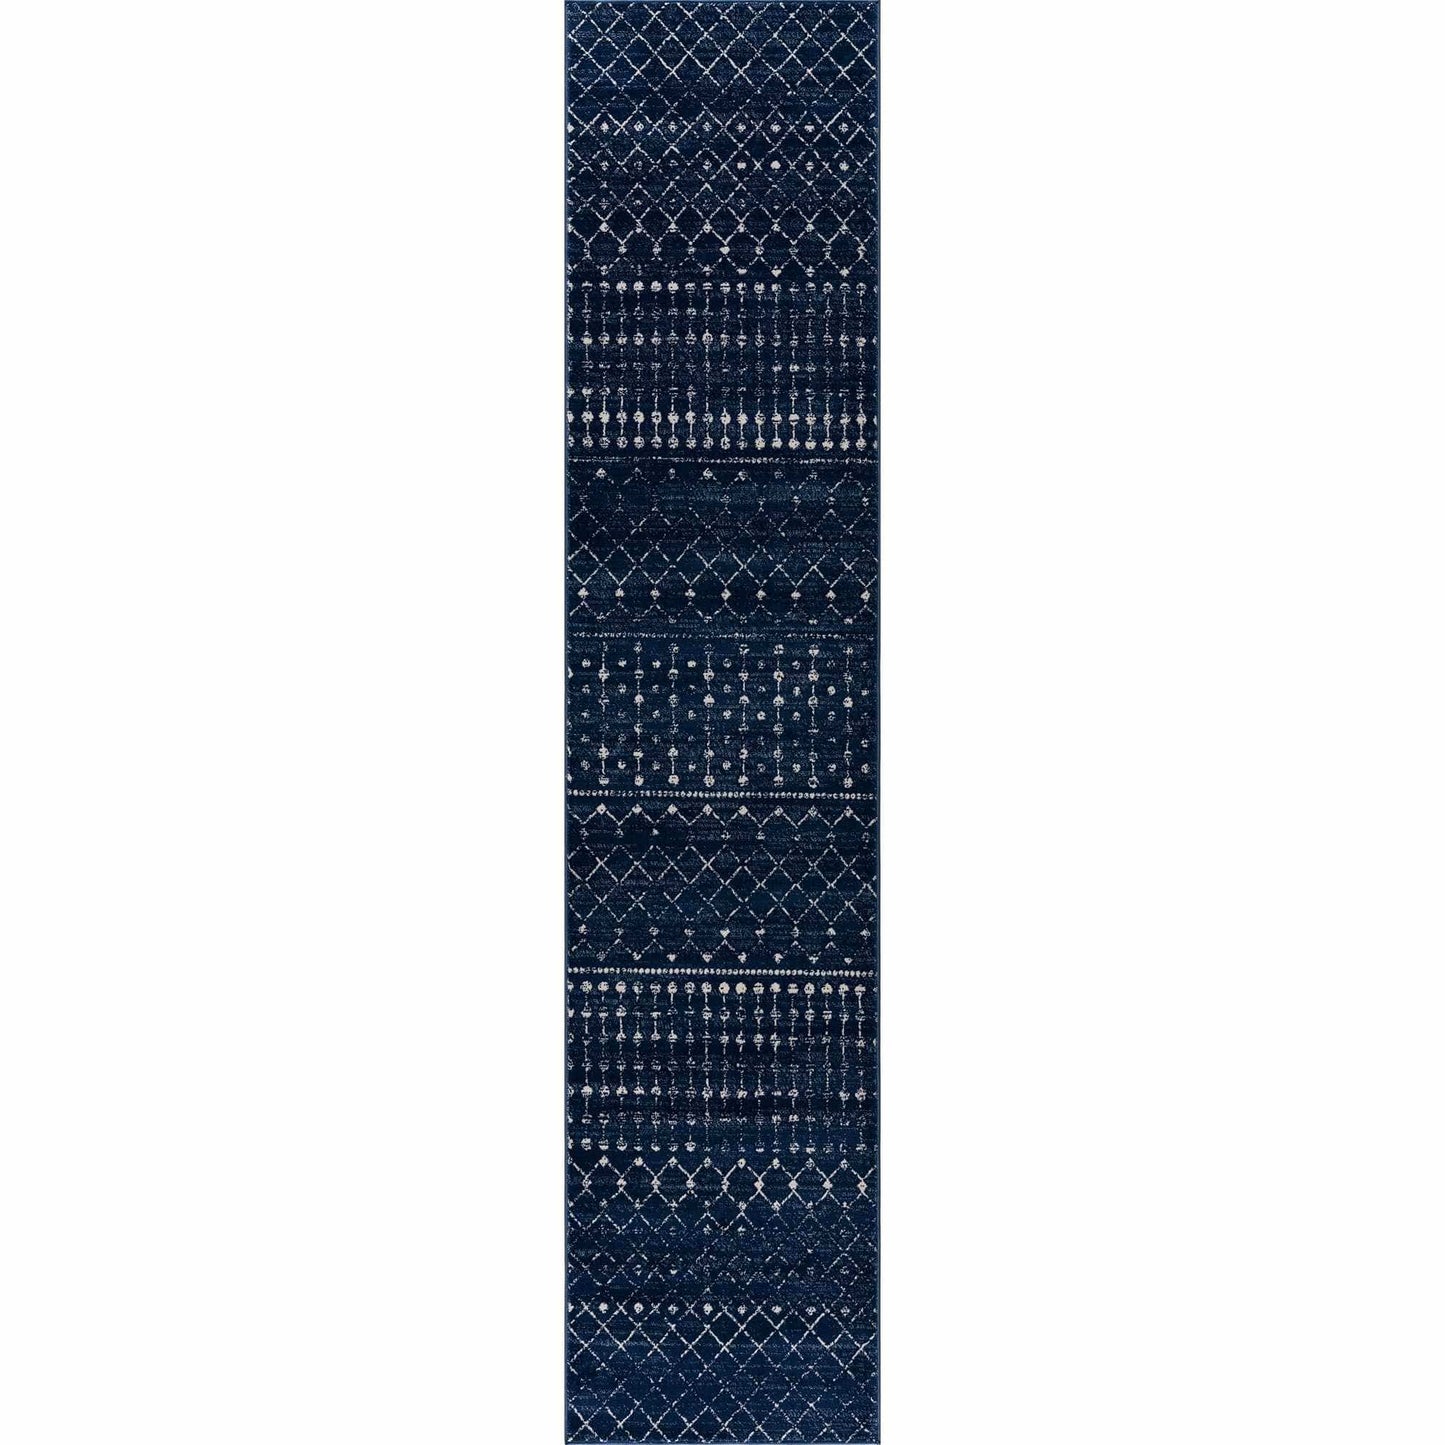 Boutique Rugs Rugs 2'7" x 10' Runner Tigrican Navy 2335 Area Rug